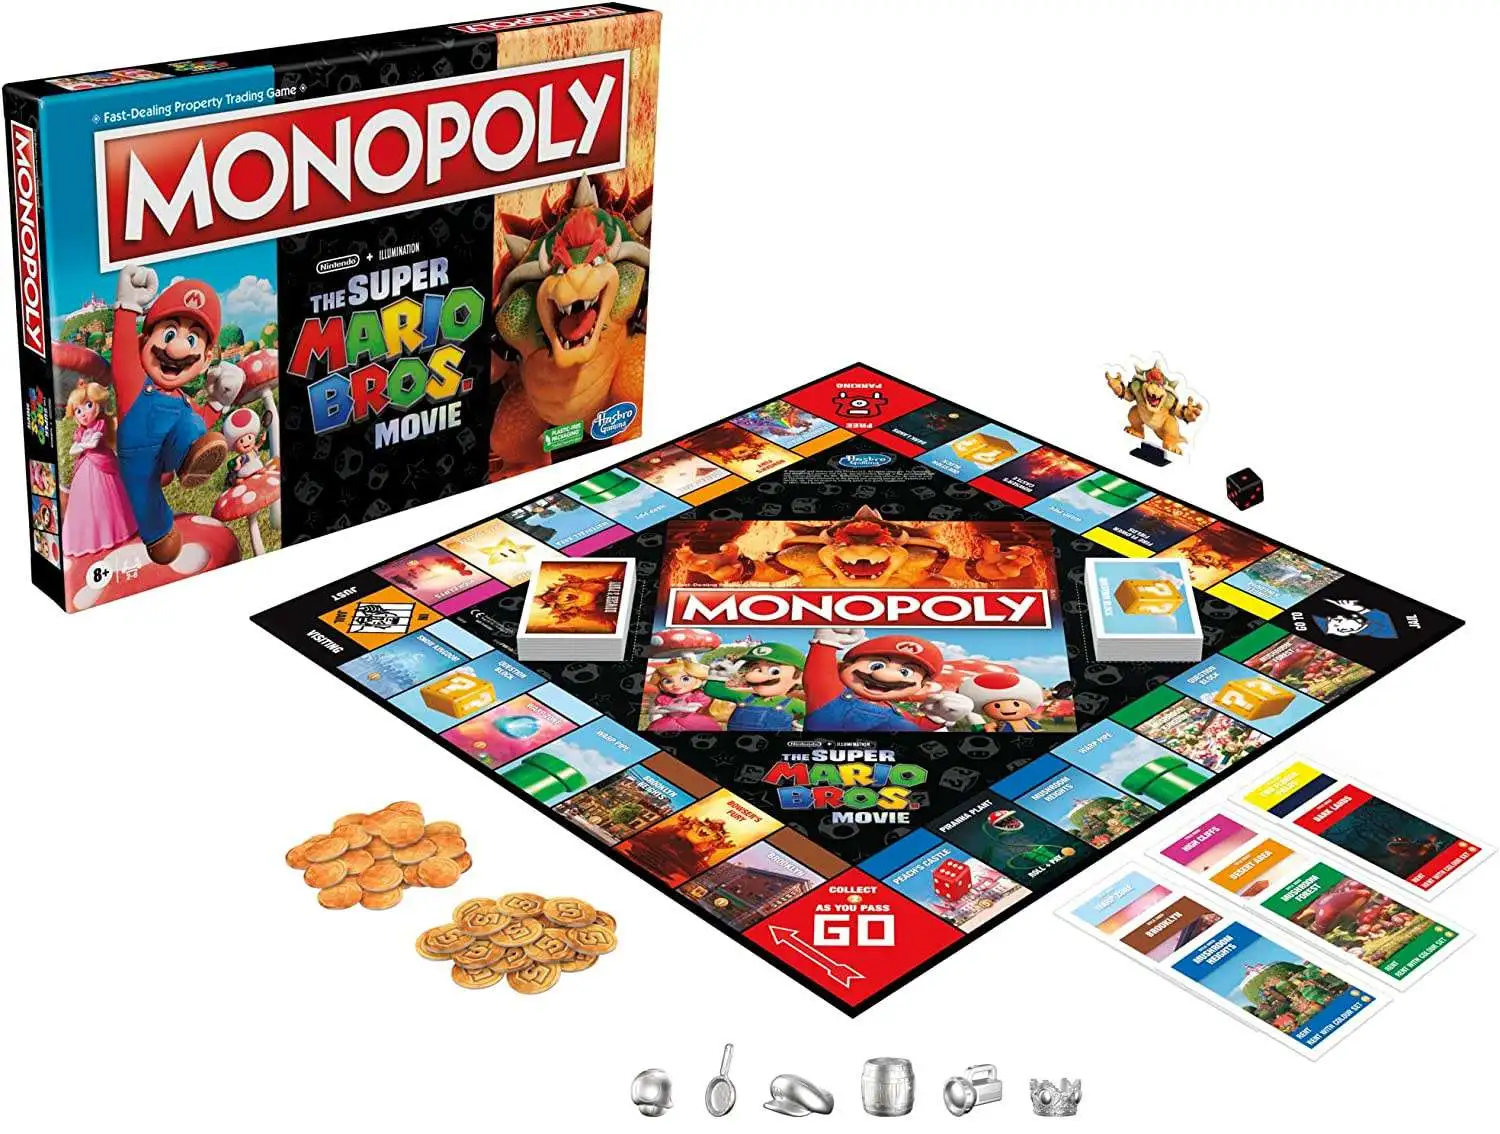 Roblox fans will soon have a themed Monopoly board game of their own